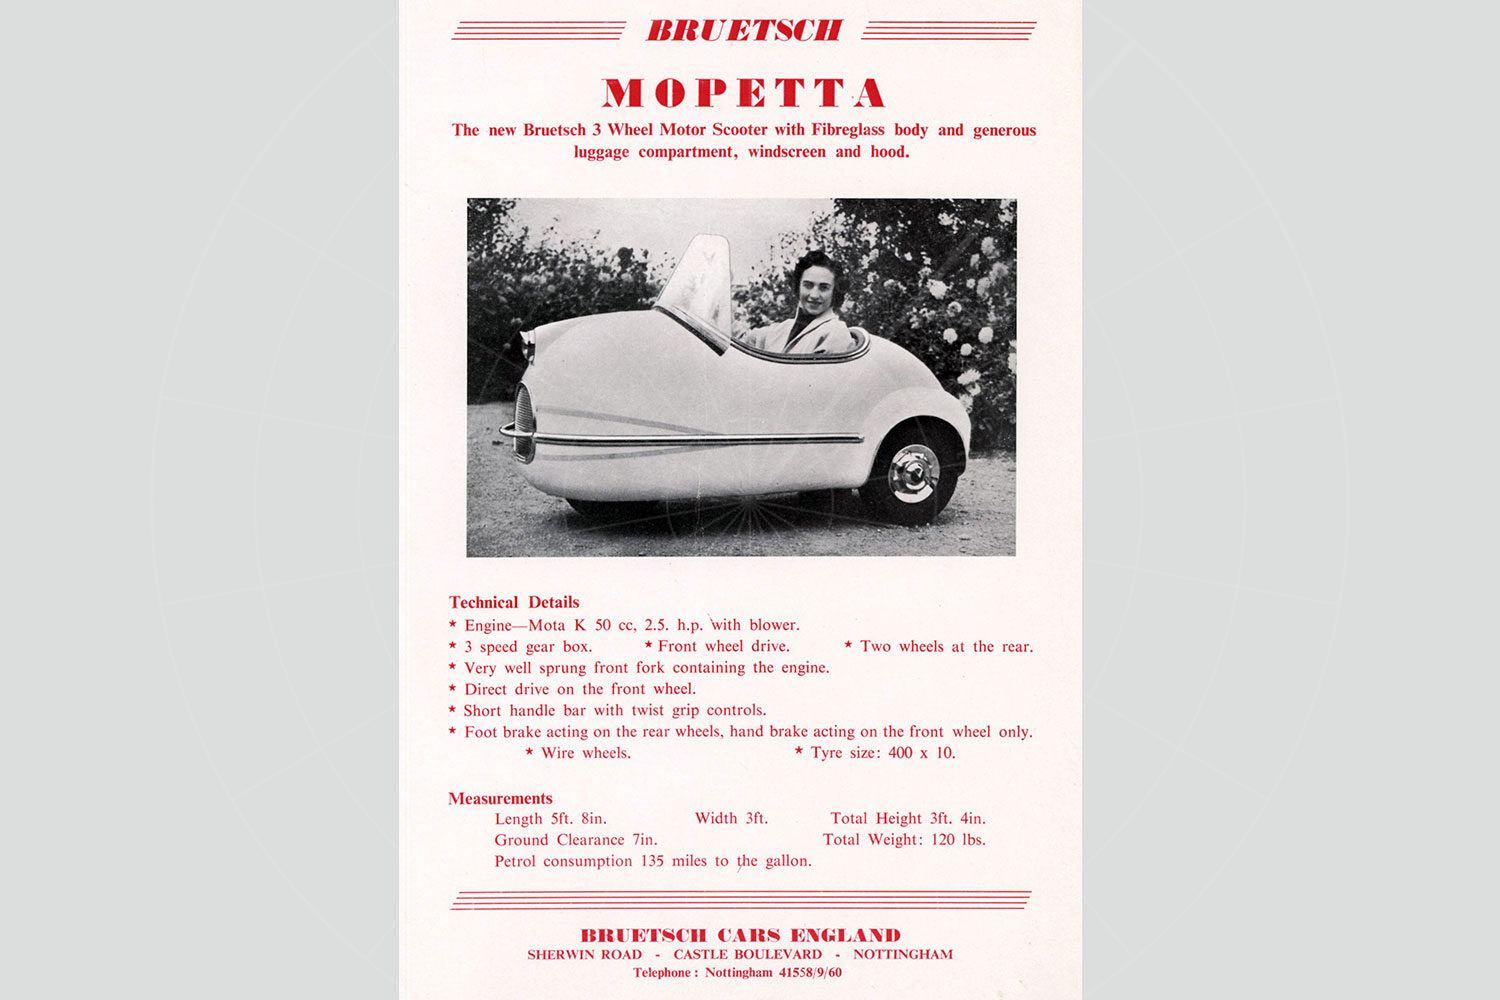 The brochure claimed that the Mopetta was front-wheel drive... Pic: magiccarpics.co.uk | 